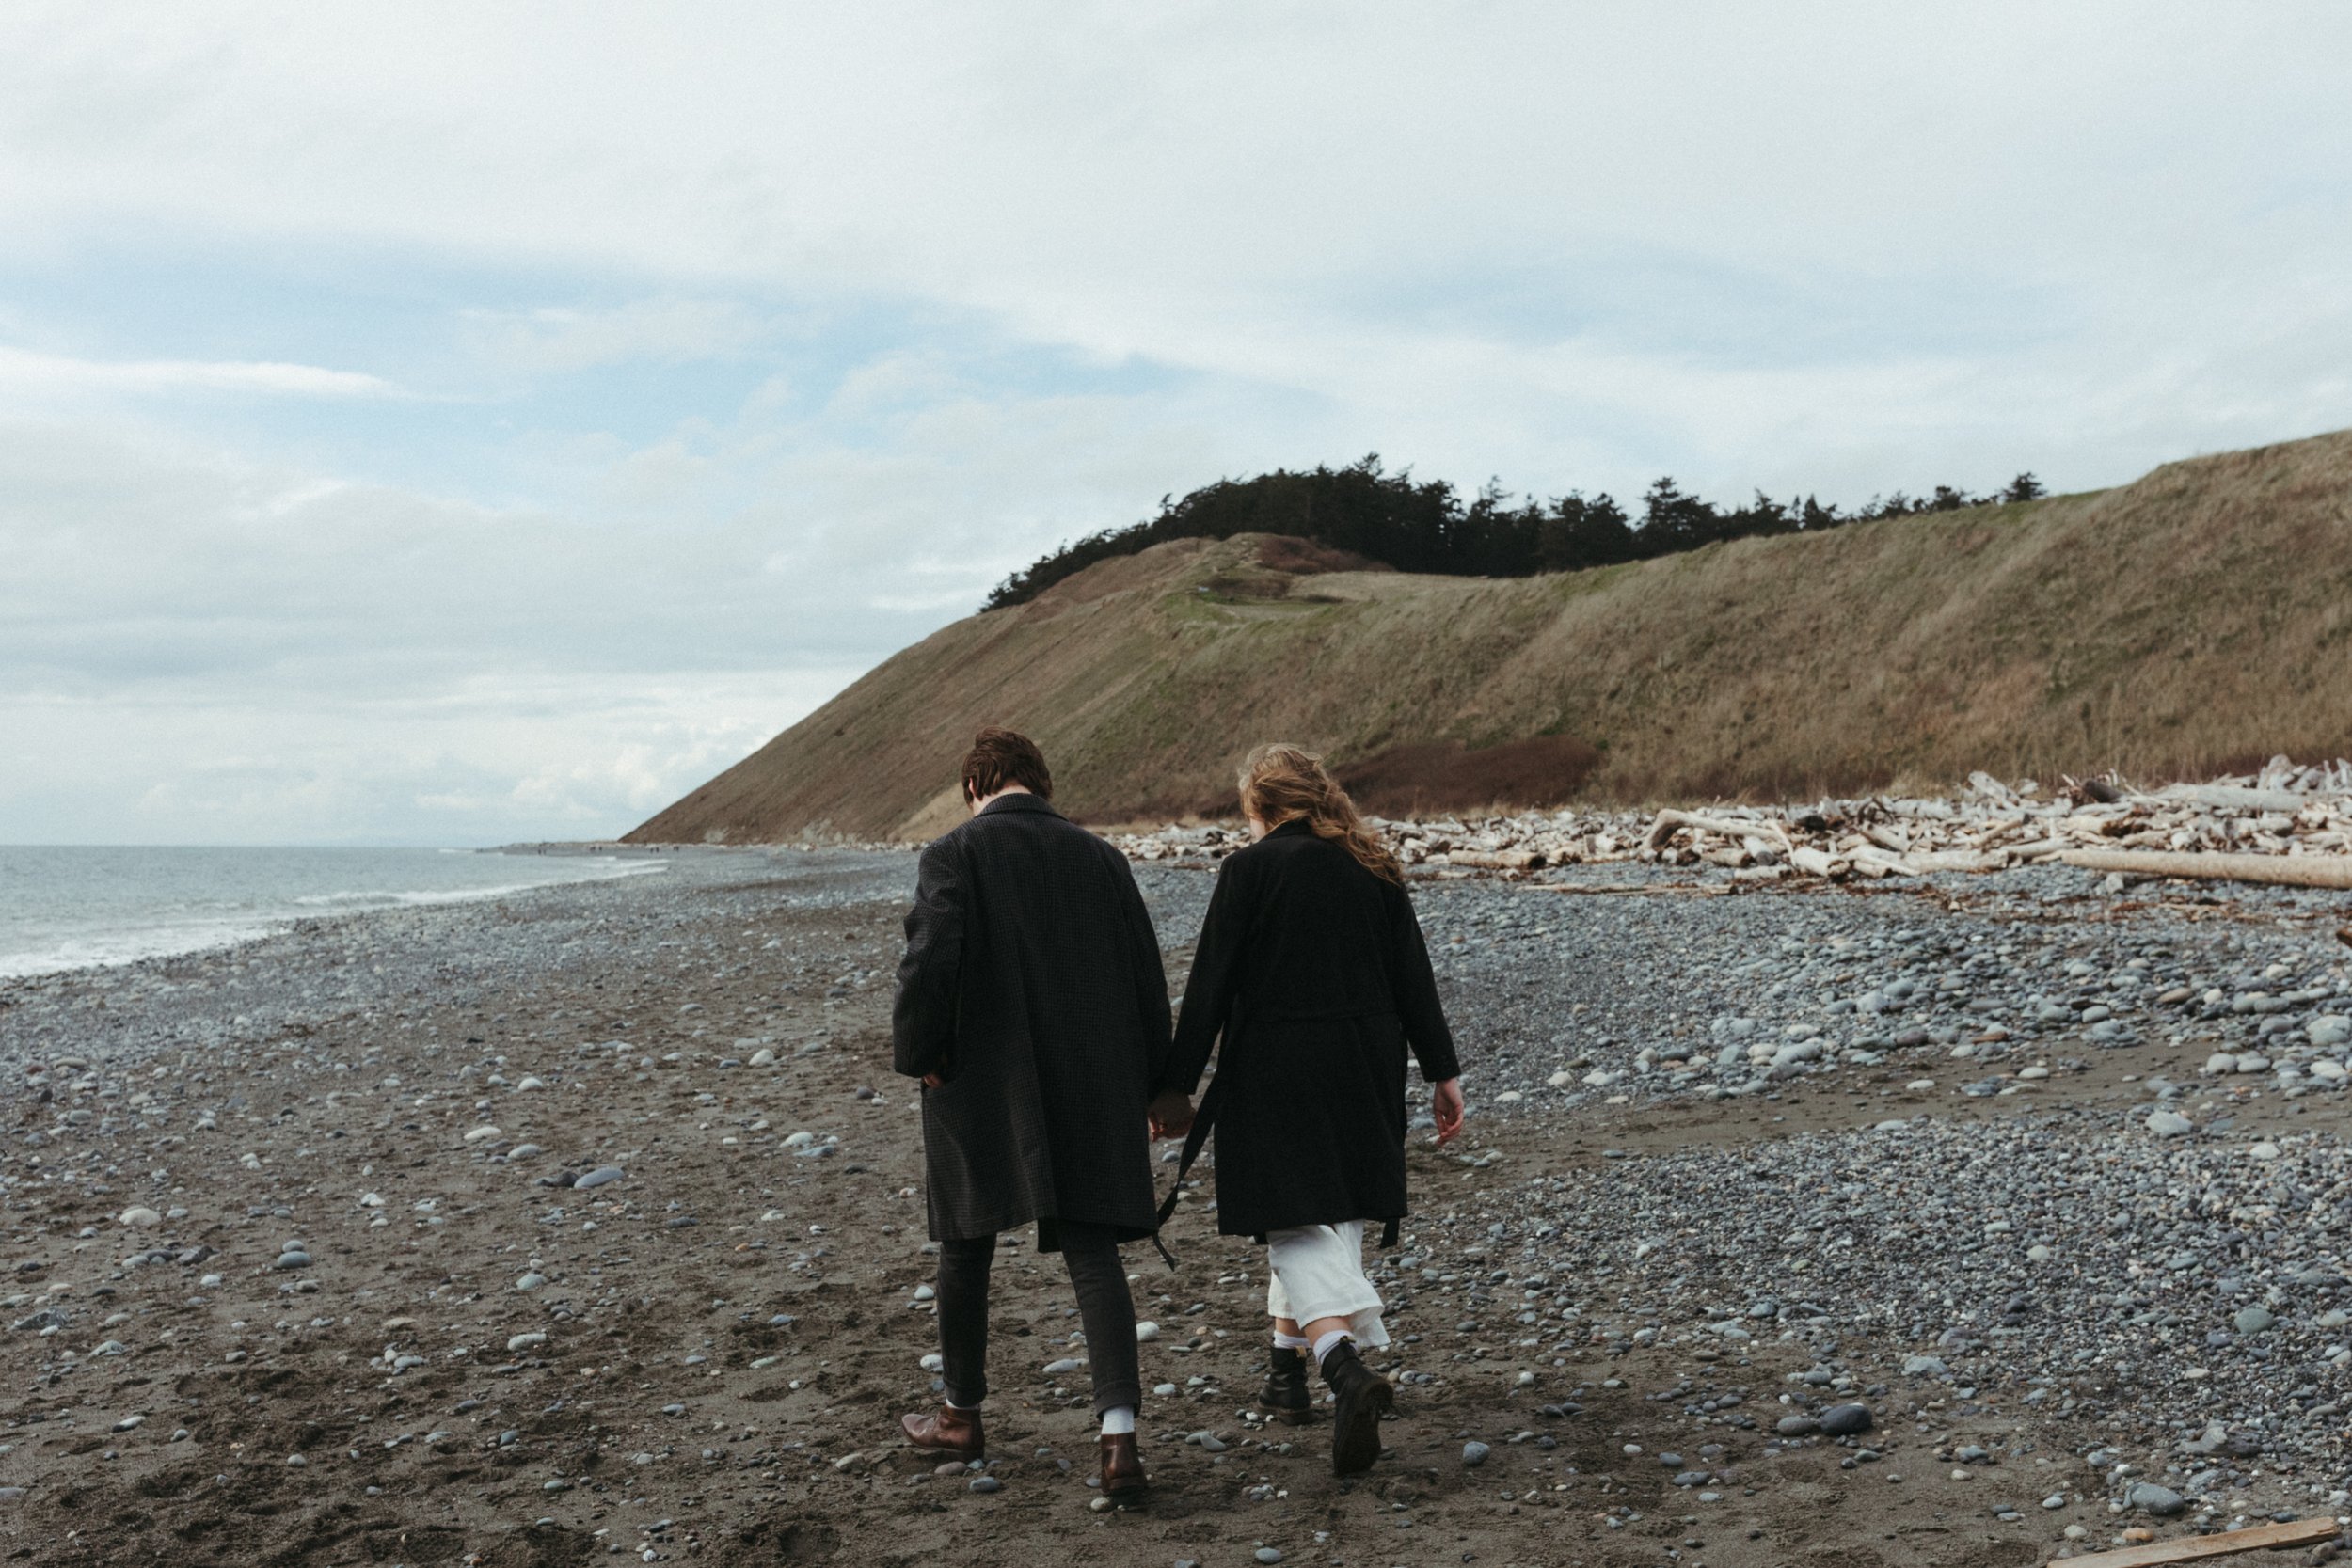 walking on the beach at ebey's landing